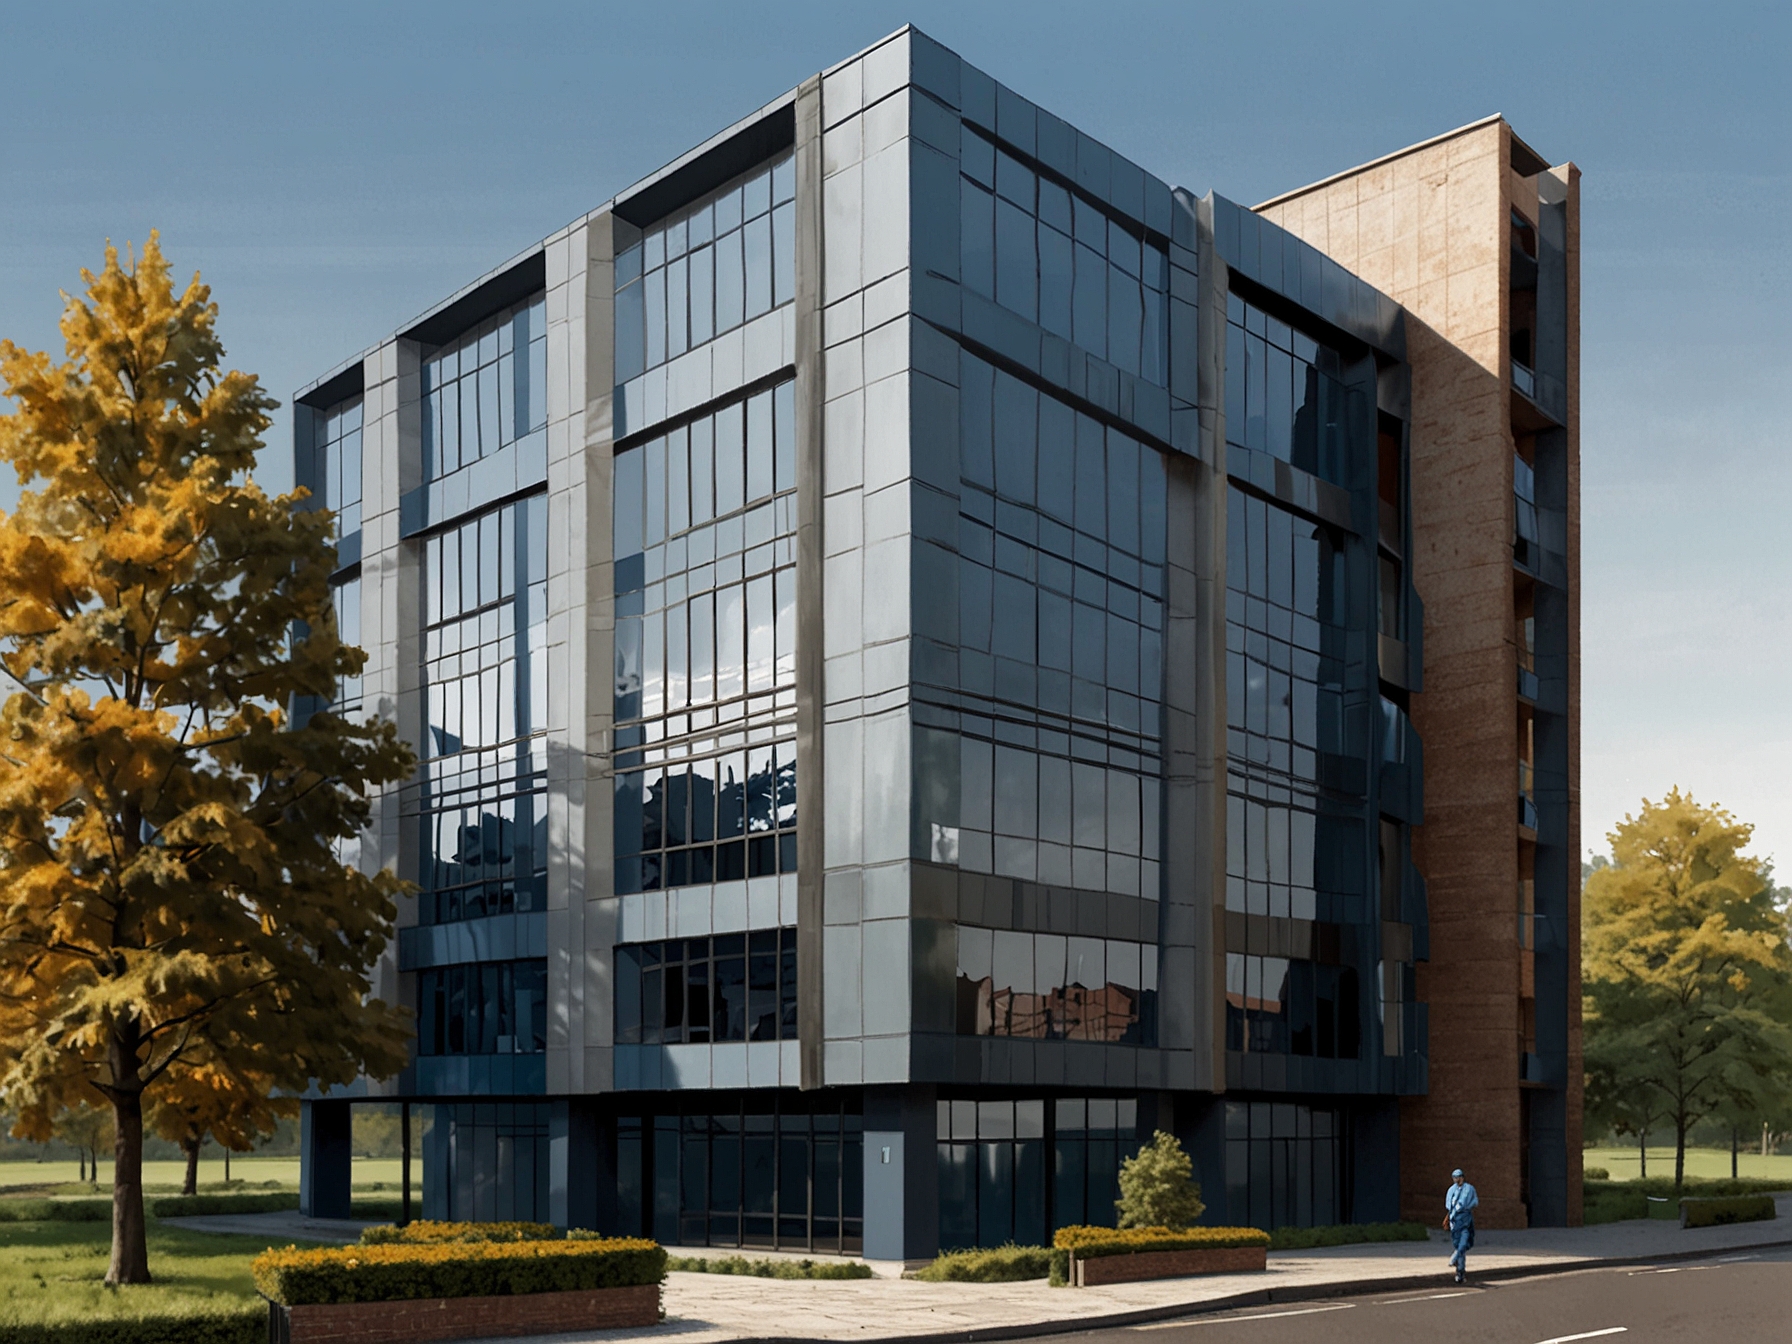 Illustration of Tata Steel's office building, reflecting its strong corporate governance and consistent dividend payouts, making it an attractive choice for dividend-seeking investors.